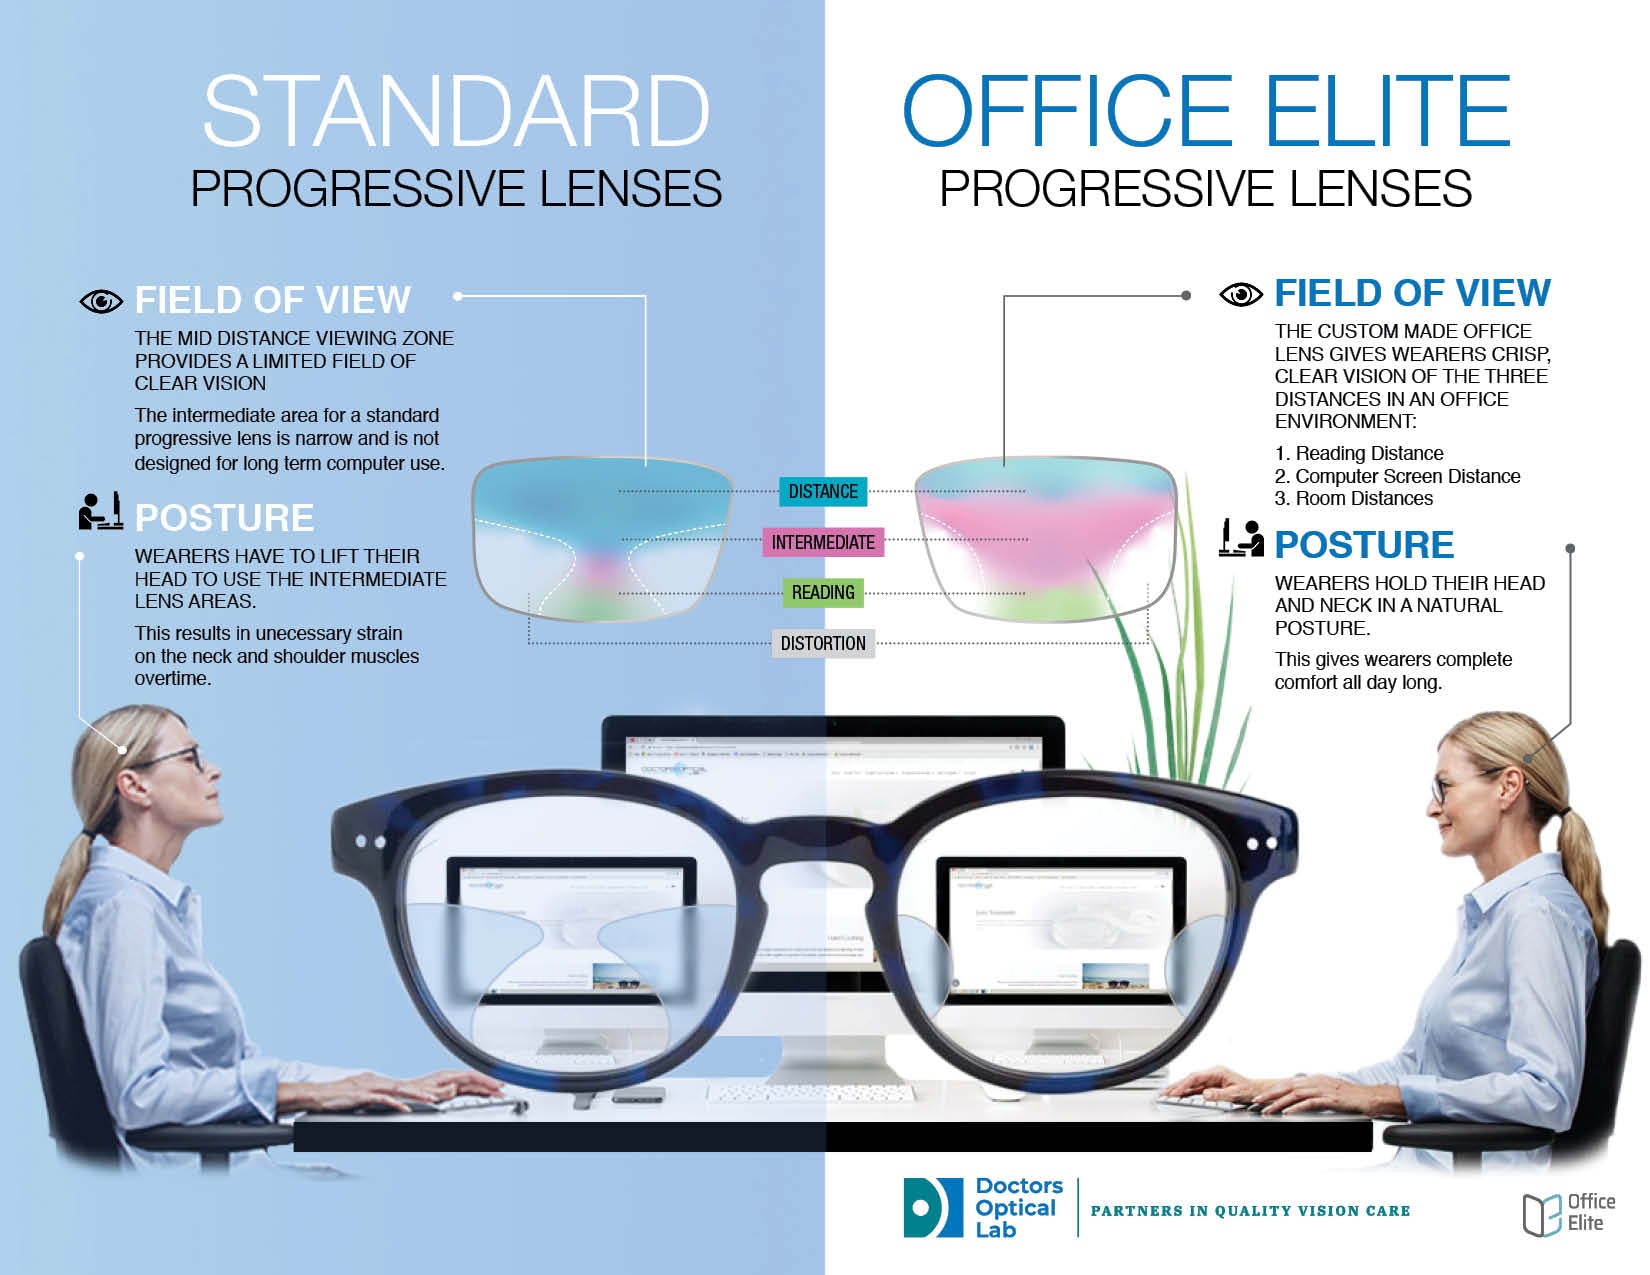 An infogrpahic that shows differences in visual performance between a computer progressive lens and standard progressive lens